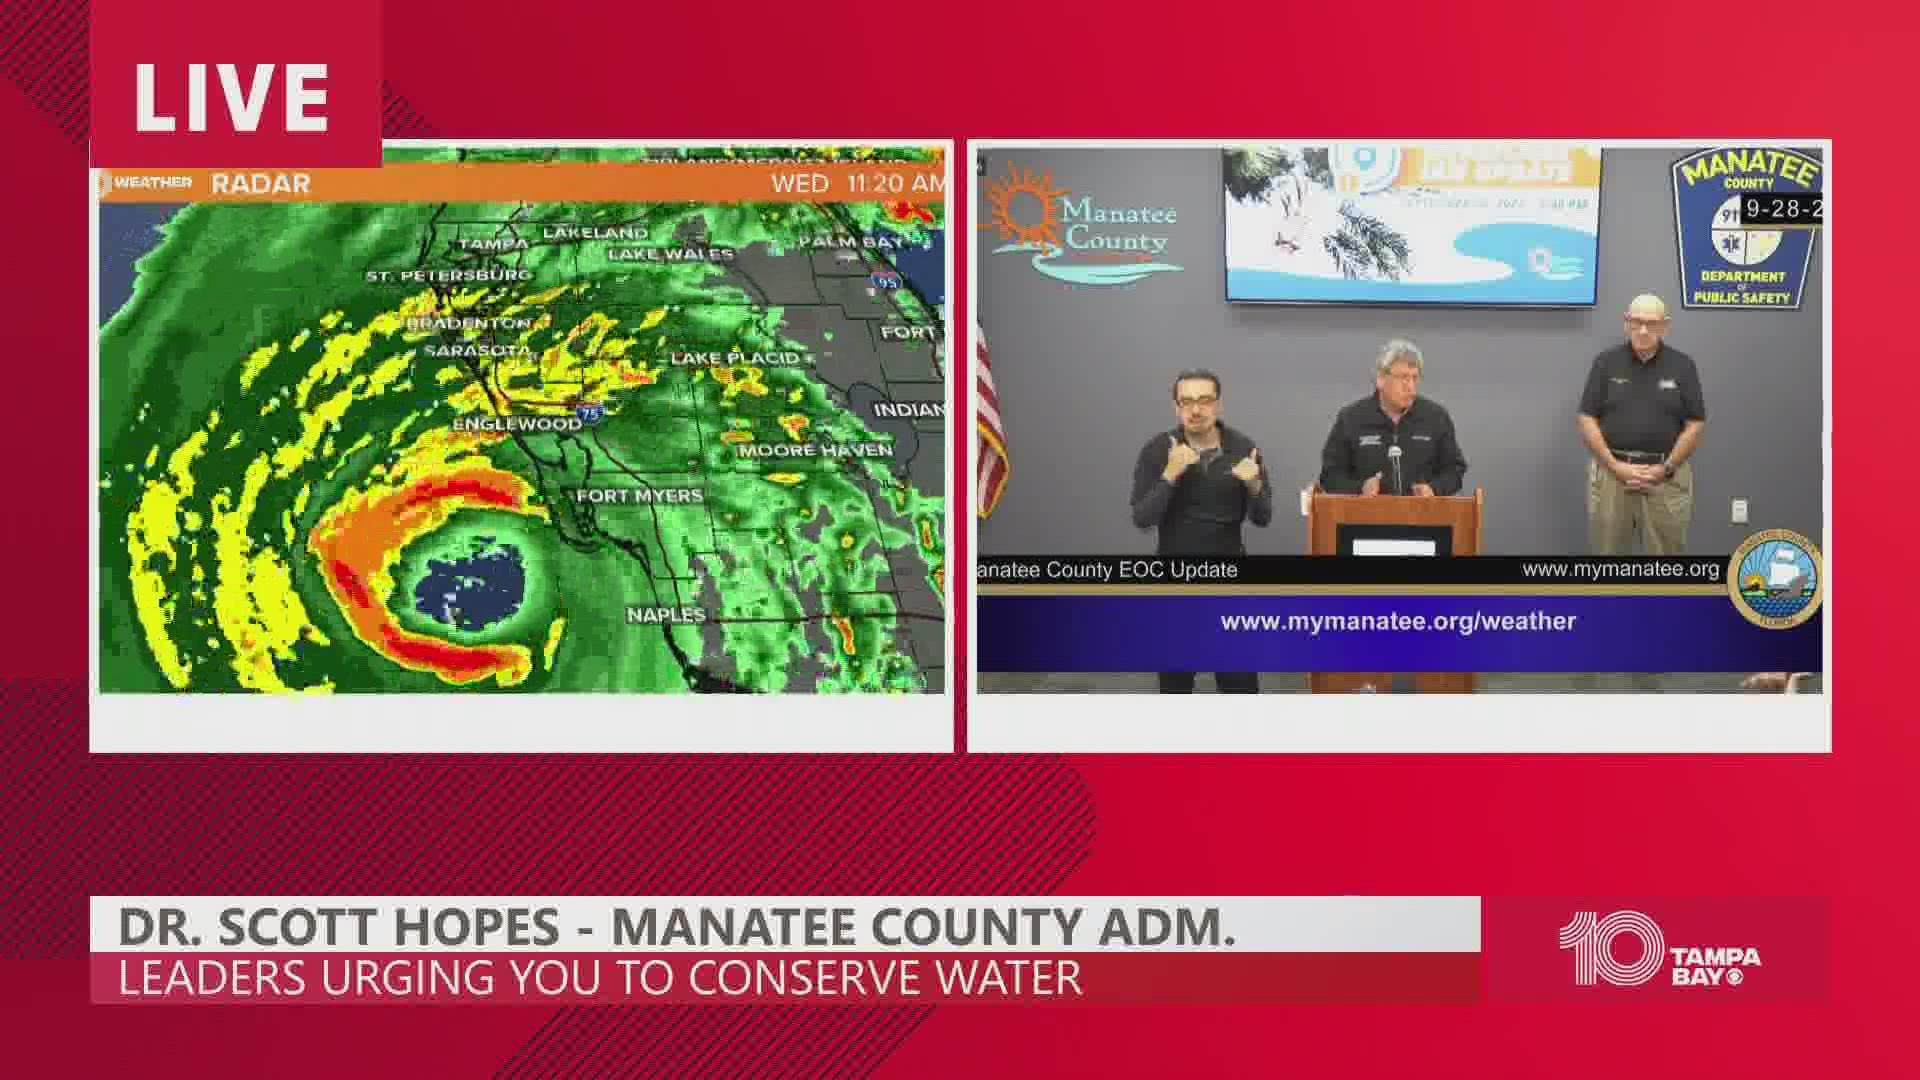 Manatee County officials warn residents to not drink uncertain water. They suggest sticking to bottled water.